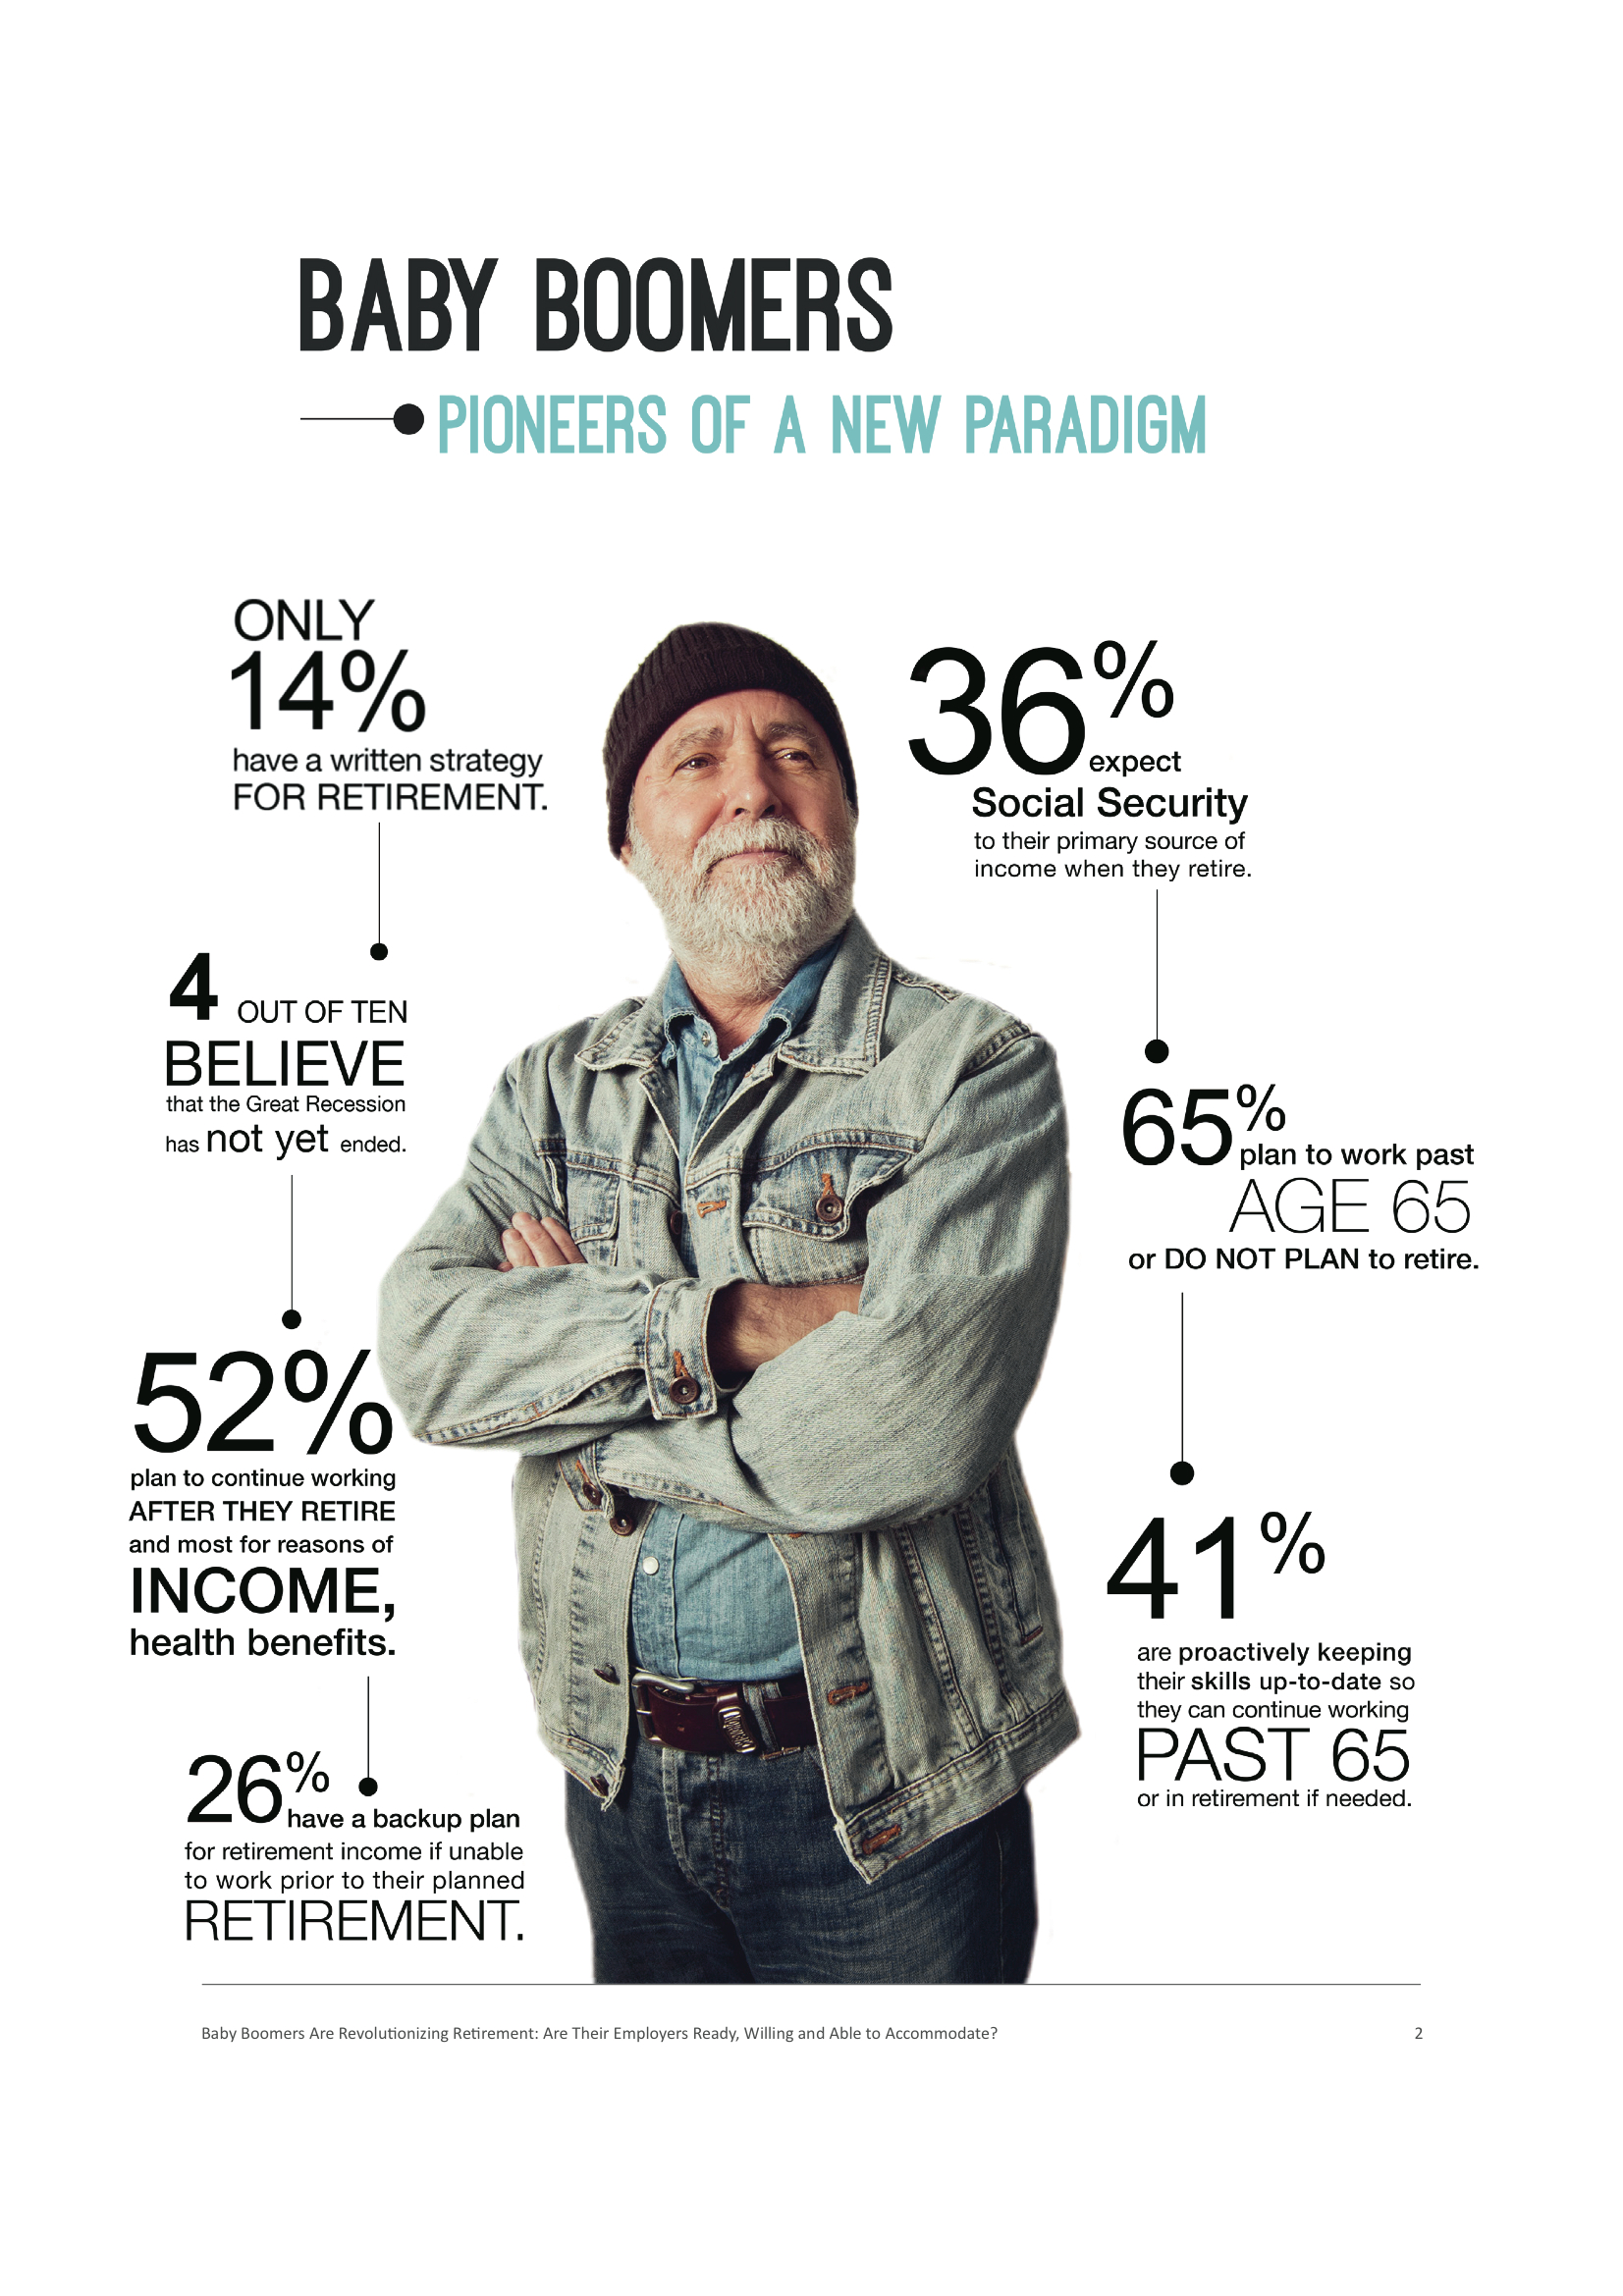 Baby Boomers: Pioneers of a New Paradigm